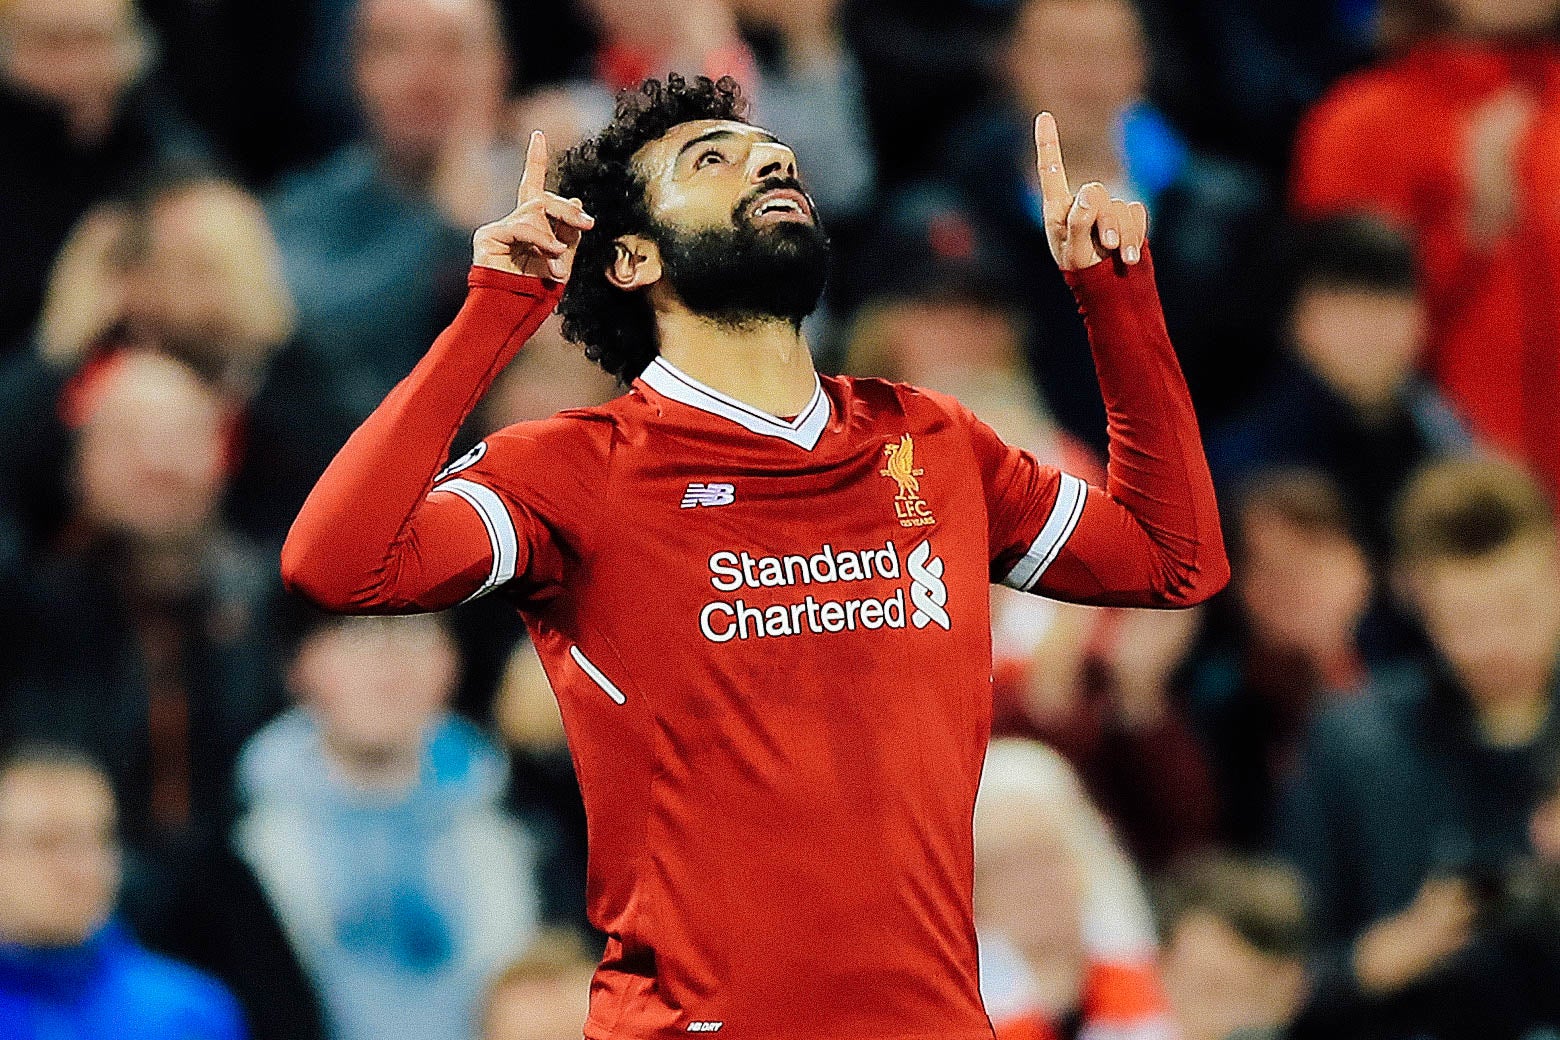 Liverpool’s Mohamed Salah celebrates scoring his side’s second goal of the game during the Champions League in Anfield stadium in Liverpool, United Kingdom.